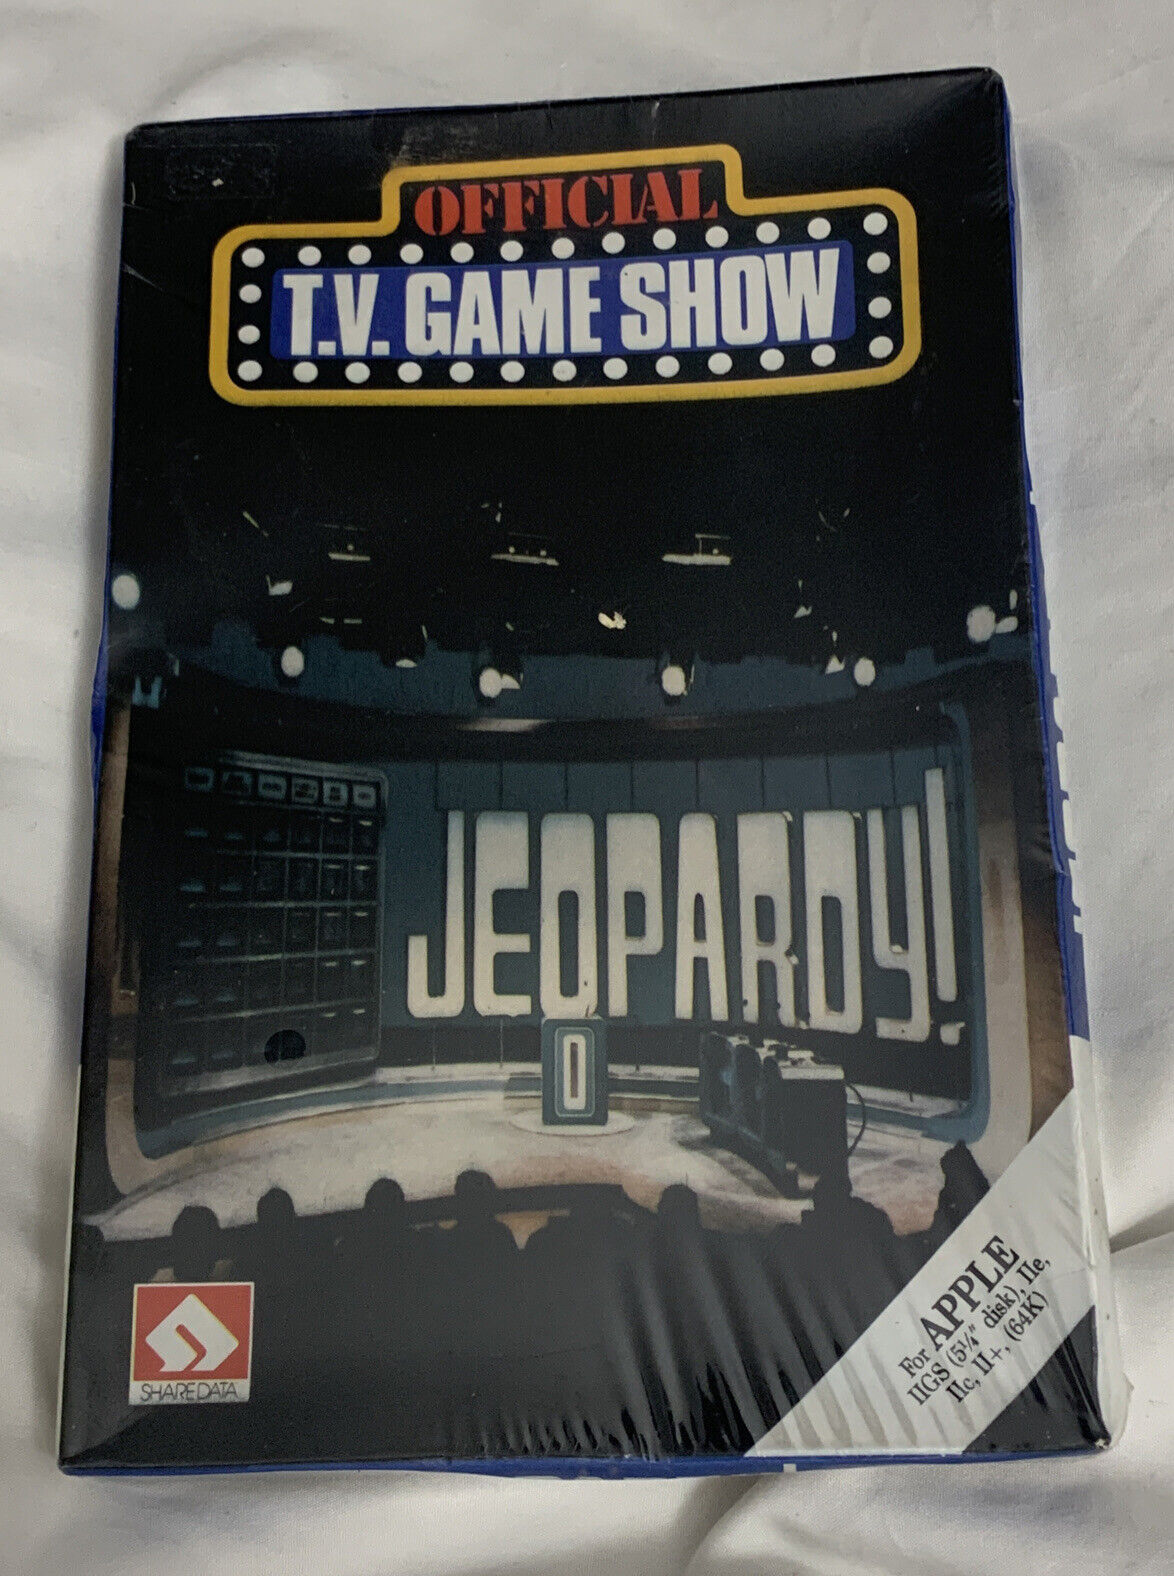 ShareData Official T.V. Game Show Jeopardy Vintage APPLE Computer Game Brand New